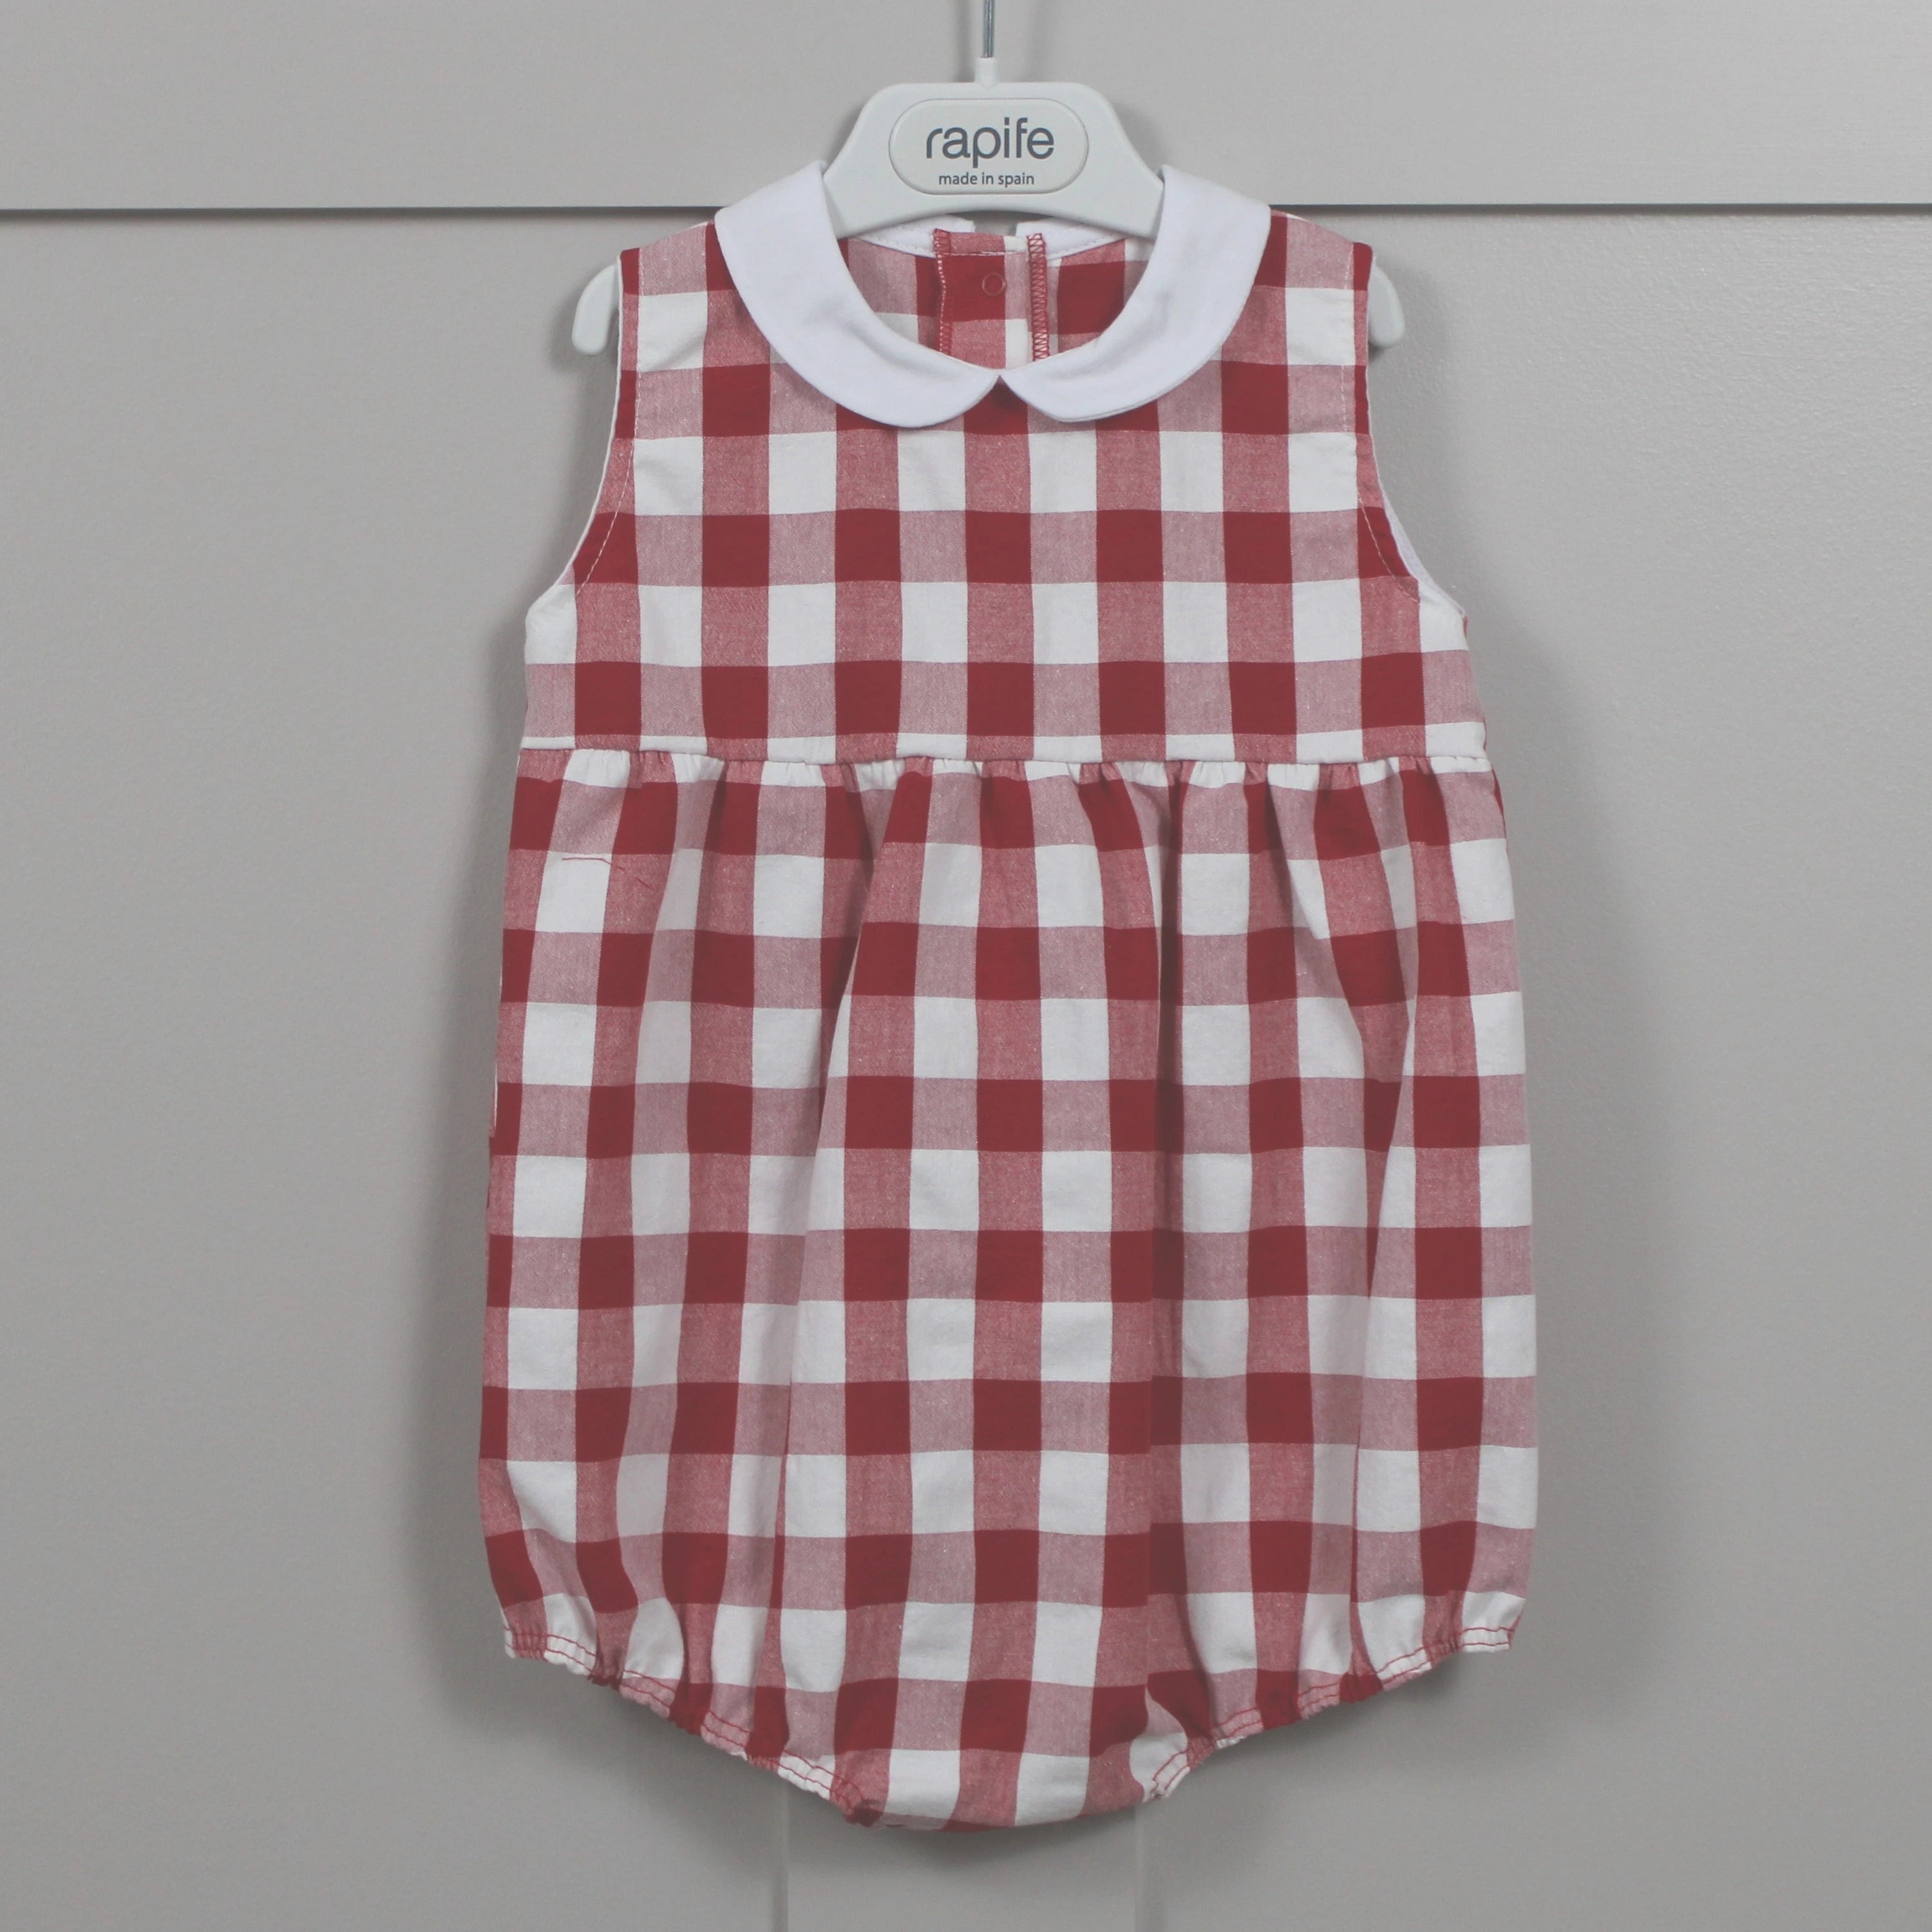 rapife red check collared romper